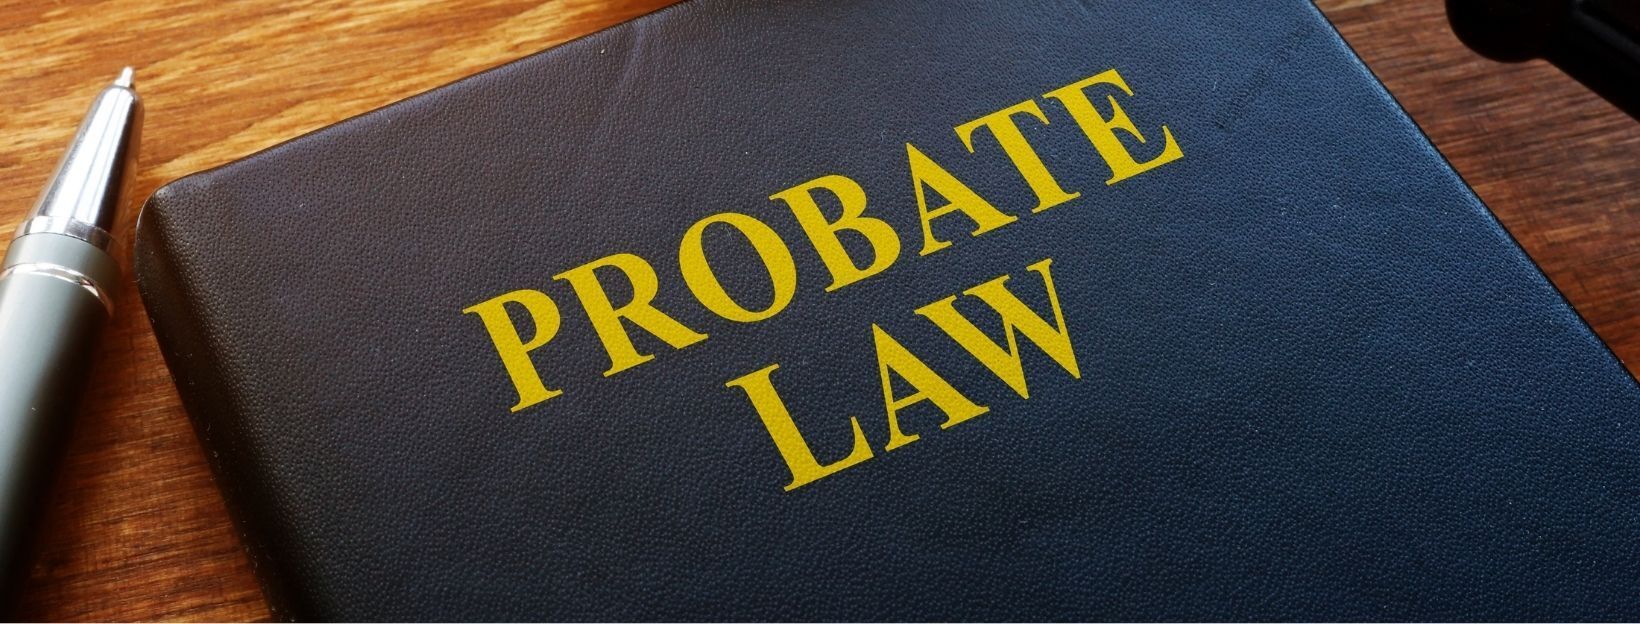 Understanding the Probate Process With or Without a Will